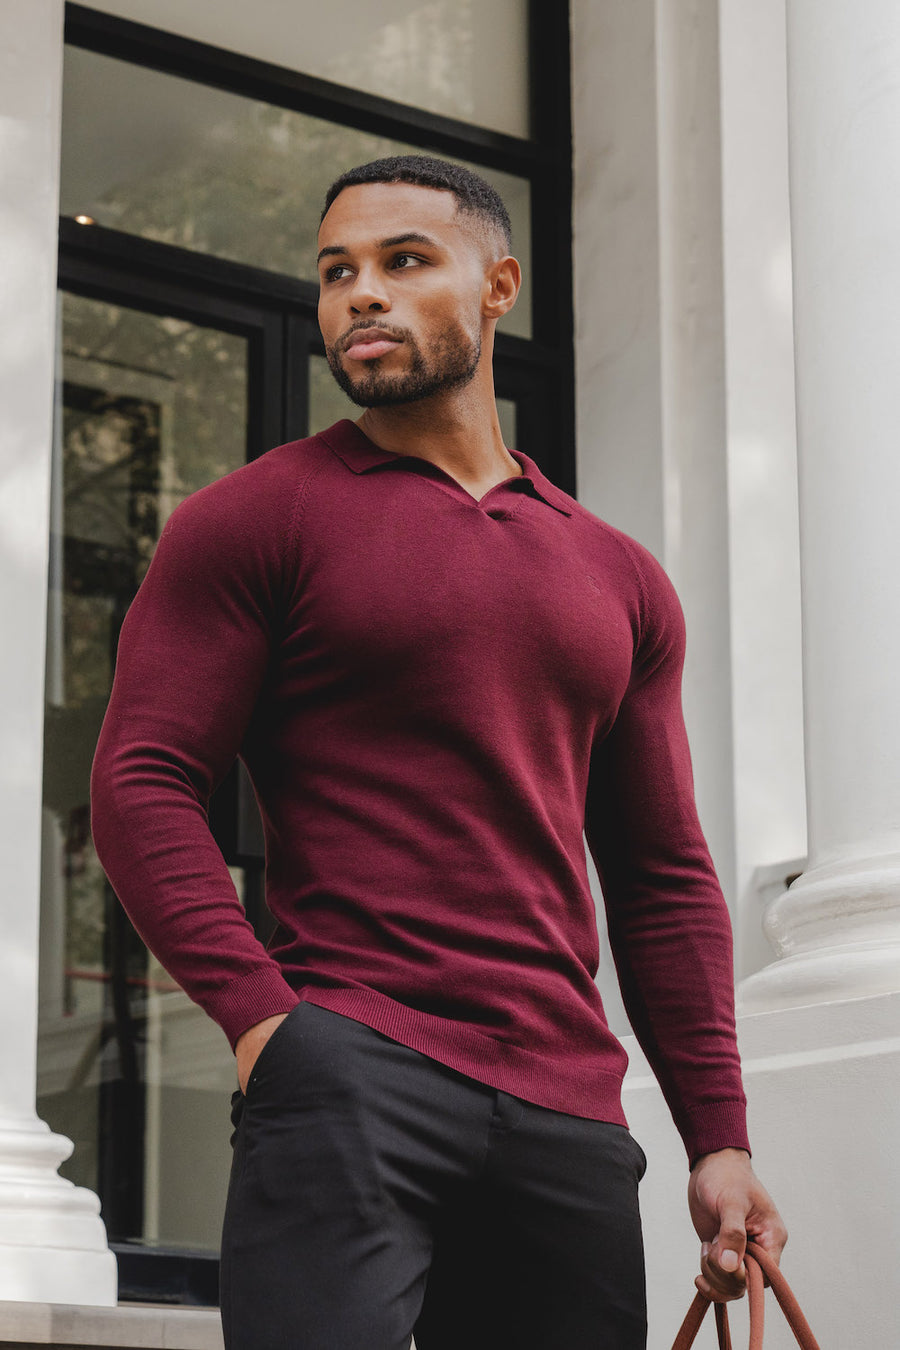 Buttonless Open Collar Polo Shirt in Claret - TAILORED ATHLETE - USA